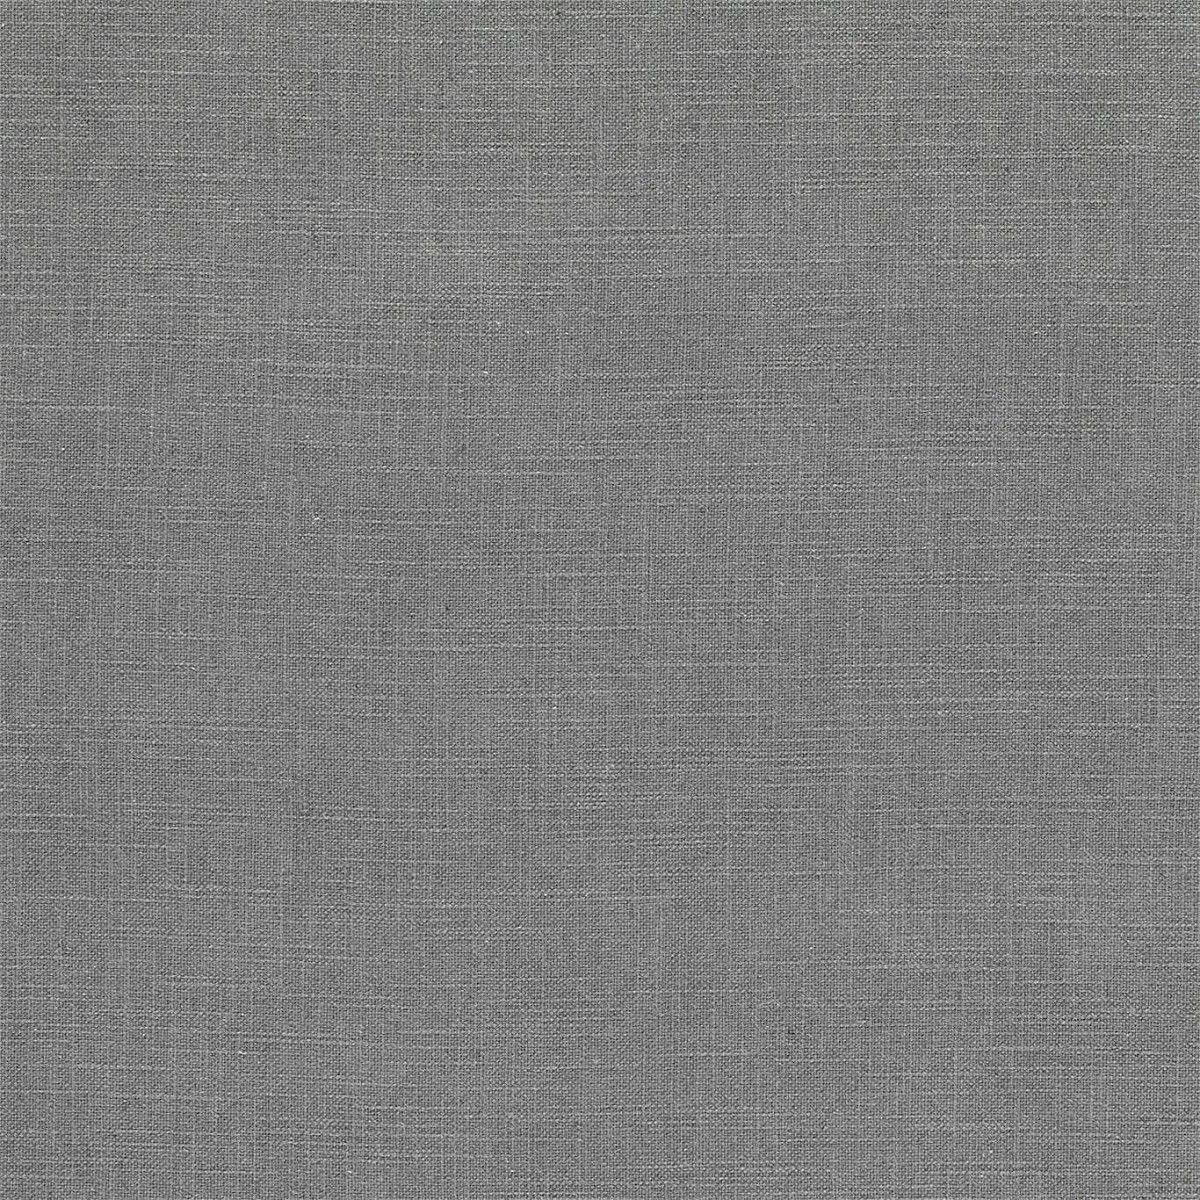 Tuscany Ii Pewter Fabric by Sanderson